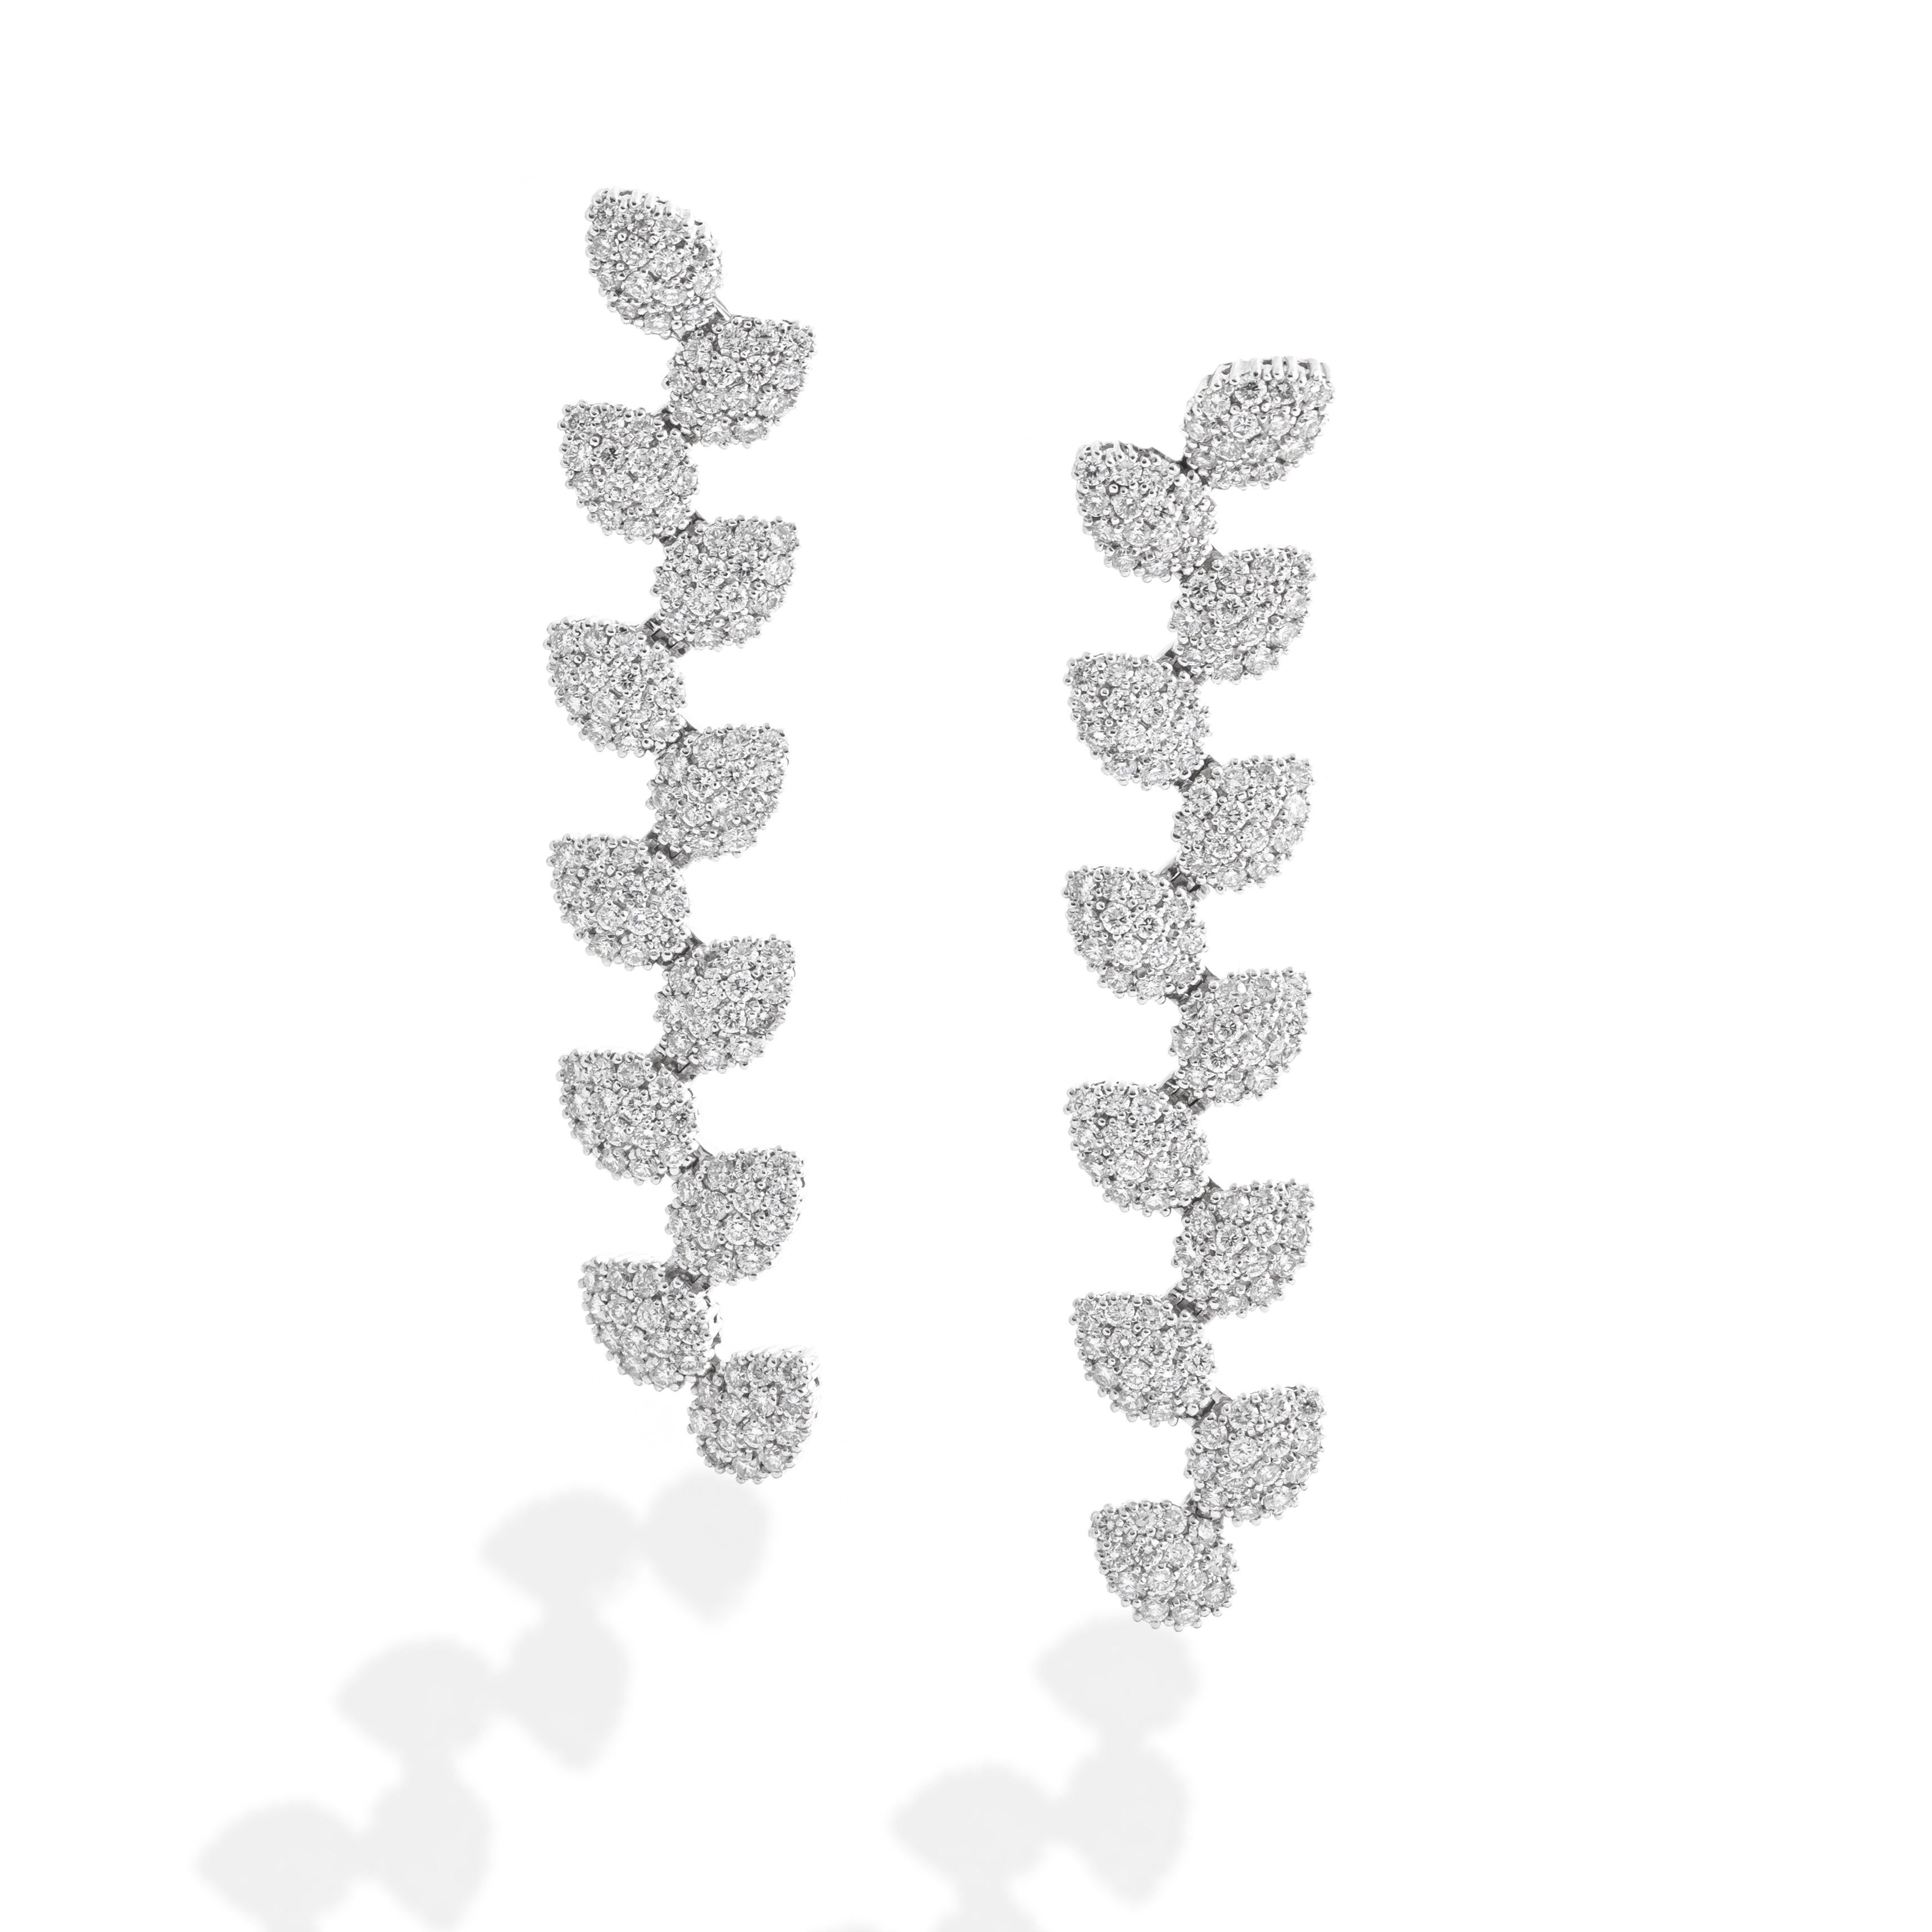 Damiani Diamond Earrings. Collection Antera.
Approximately between 5 and 6 carats. Estimated color H.
Total length: 7.00 centimeters.